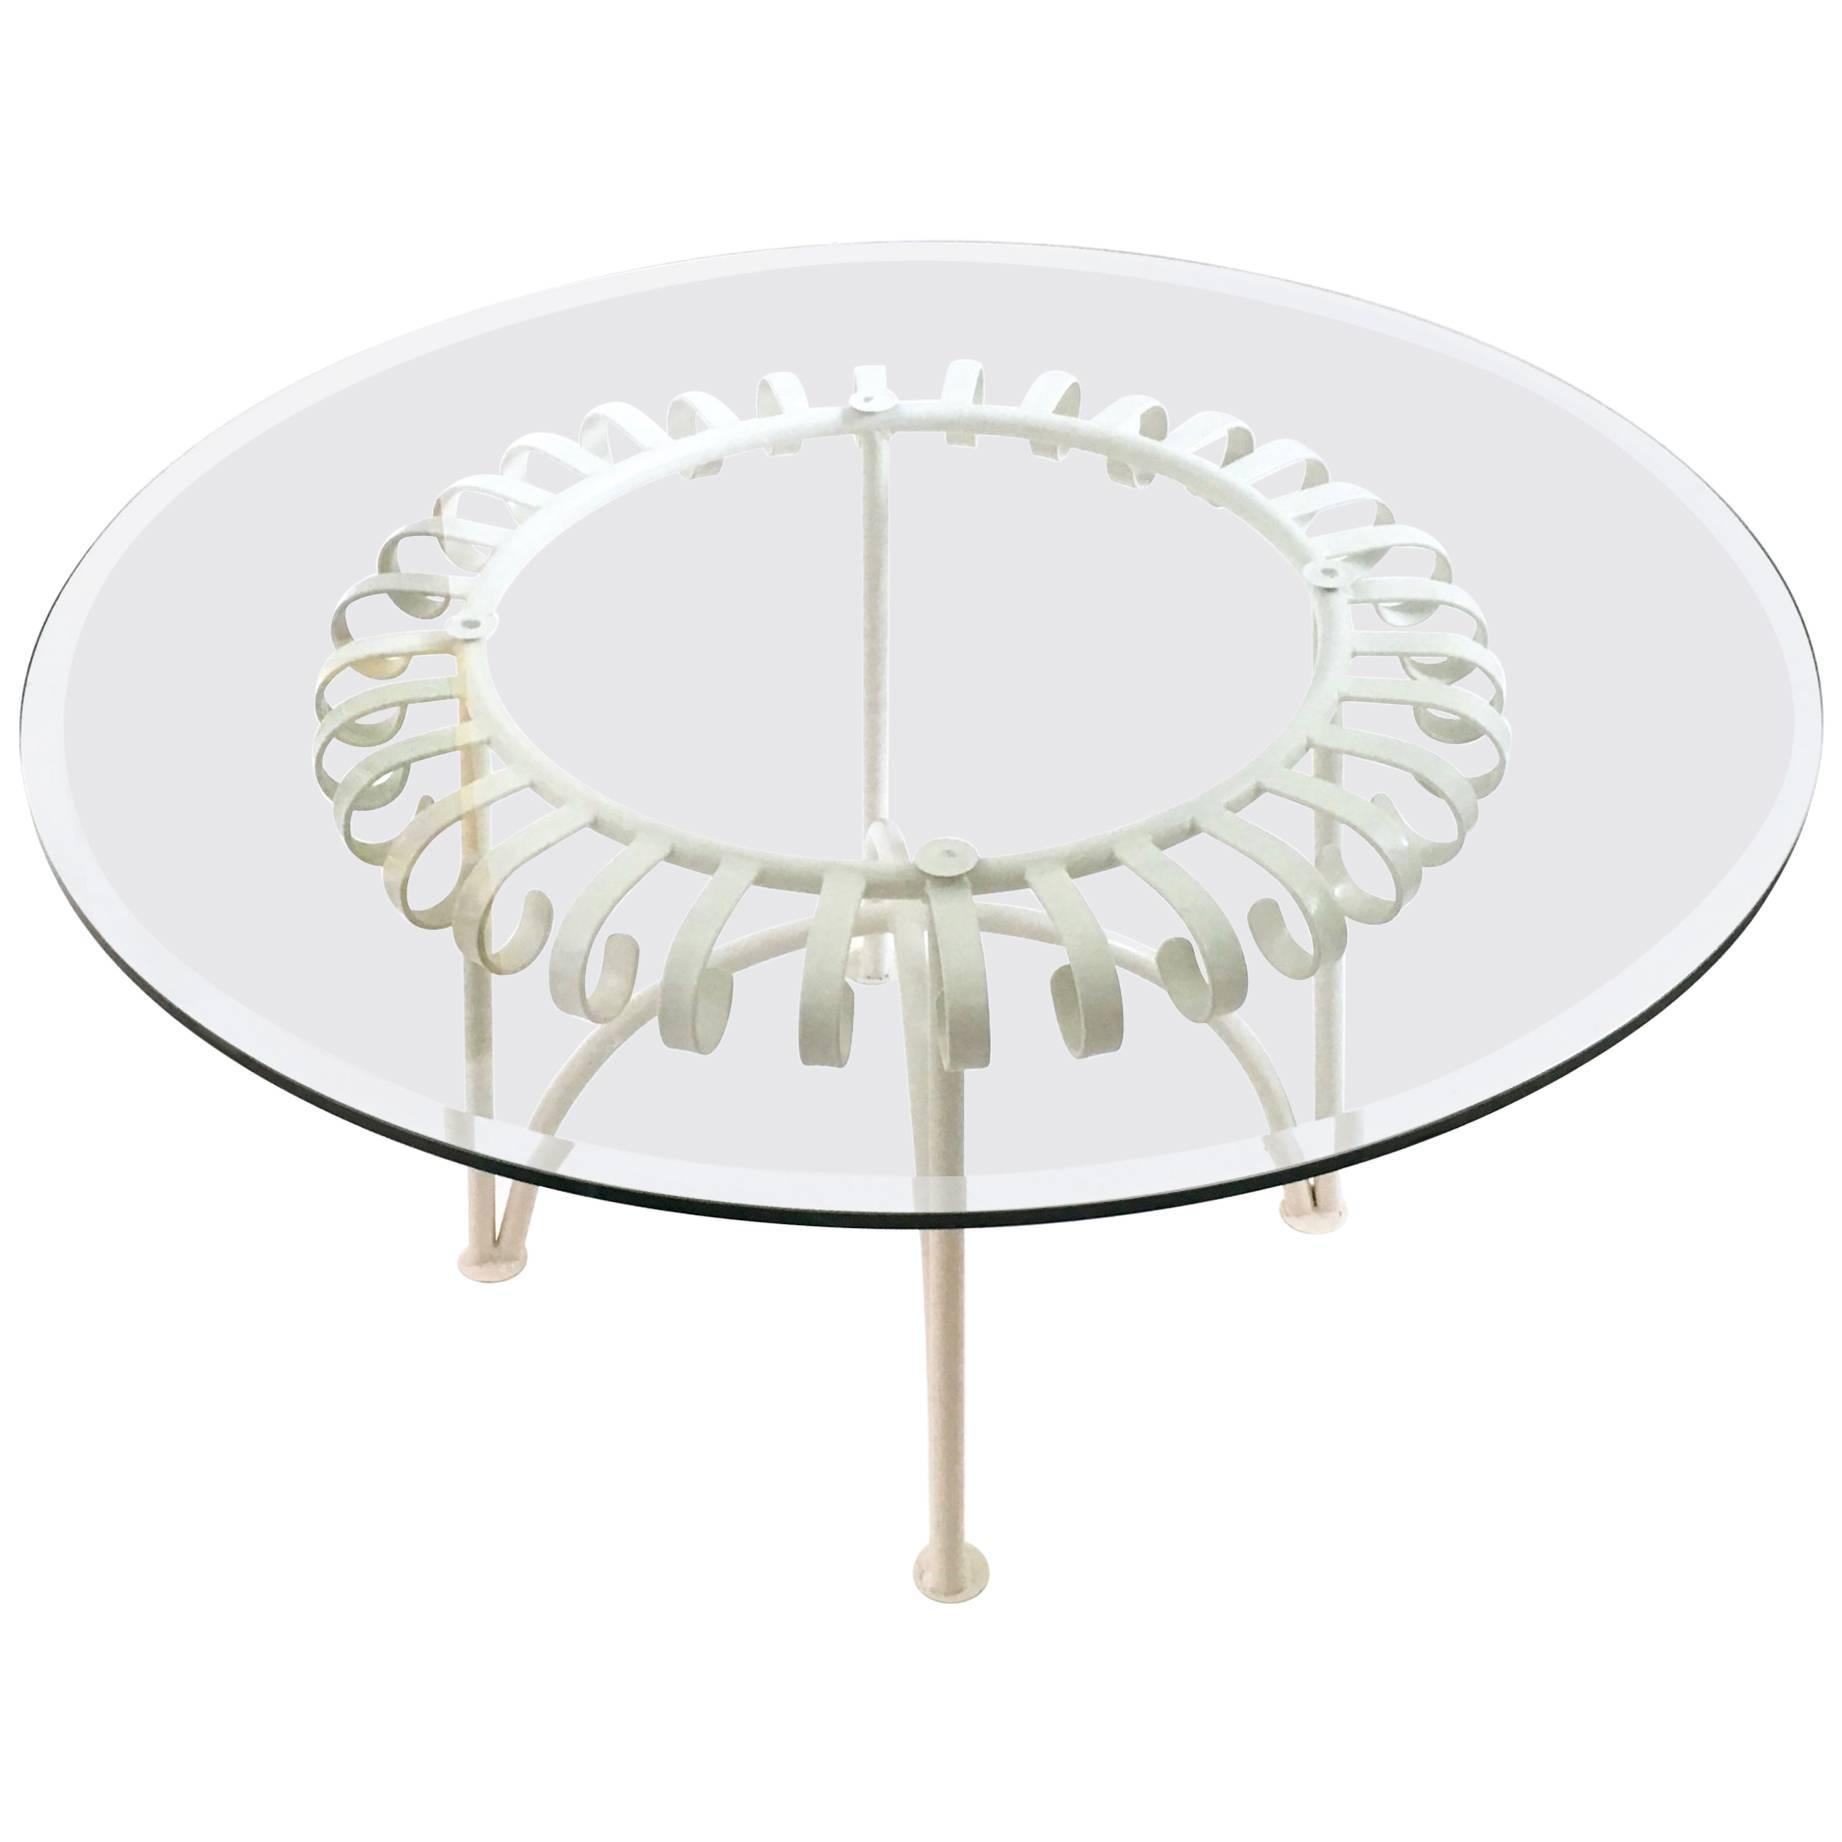 Midcentury White Varnished Metal Coffee Table with Round Glass Top, Italy 1950s